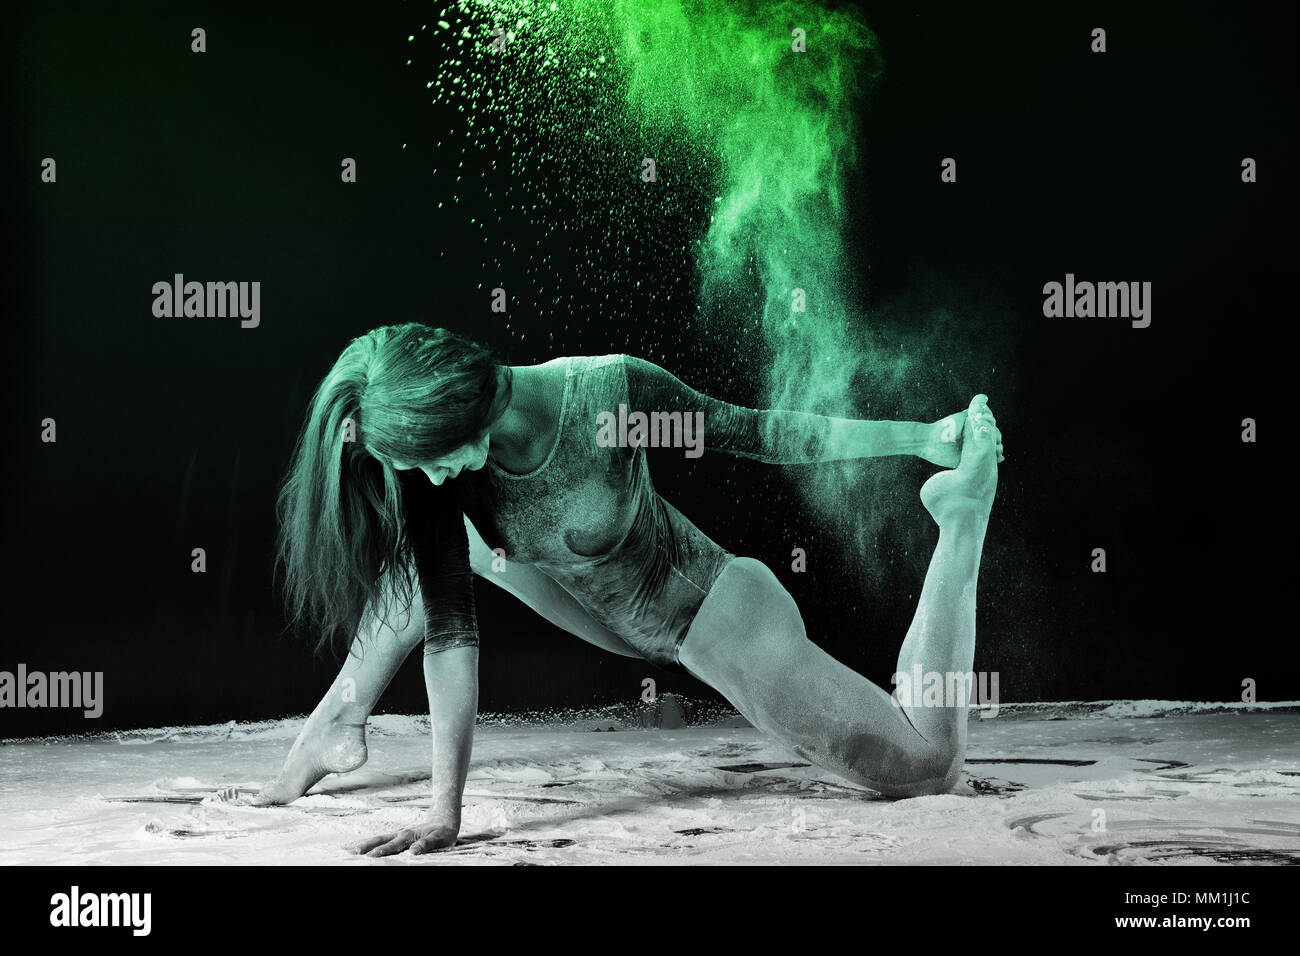 Slender girl dancing in white dust, Studio shot. Illuminated with colored lanterns. Blue and green on black background Stock Photo